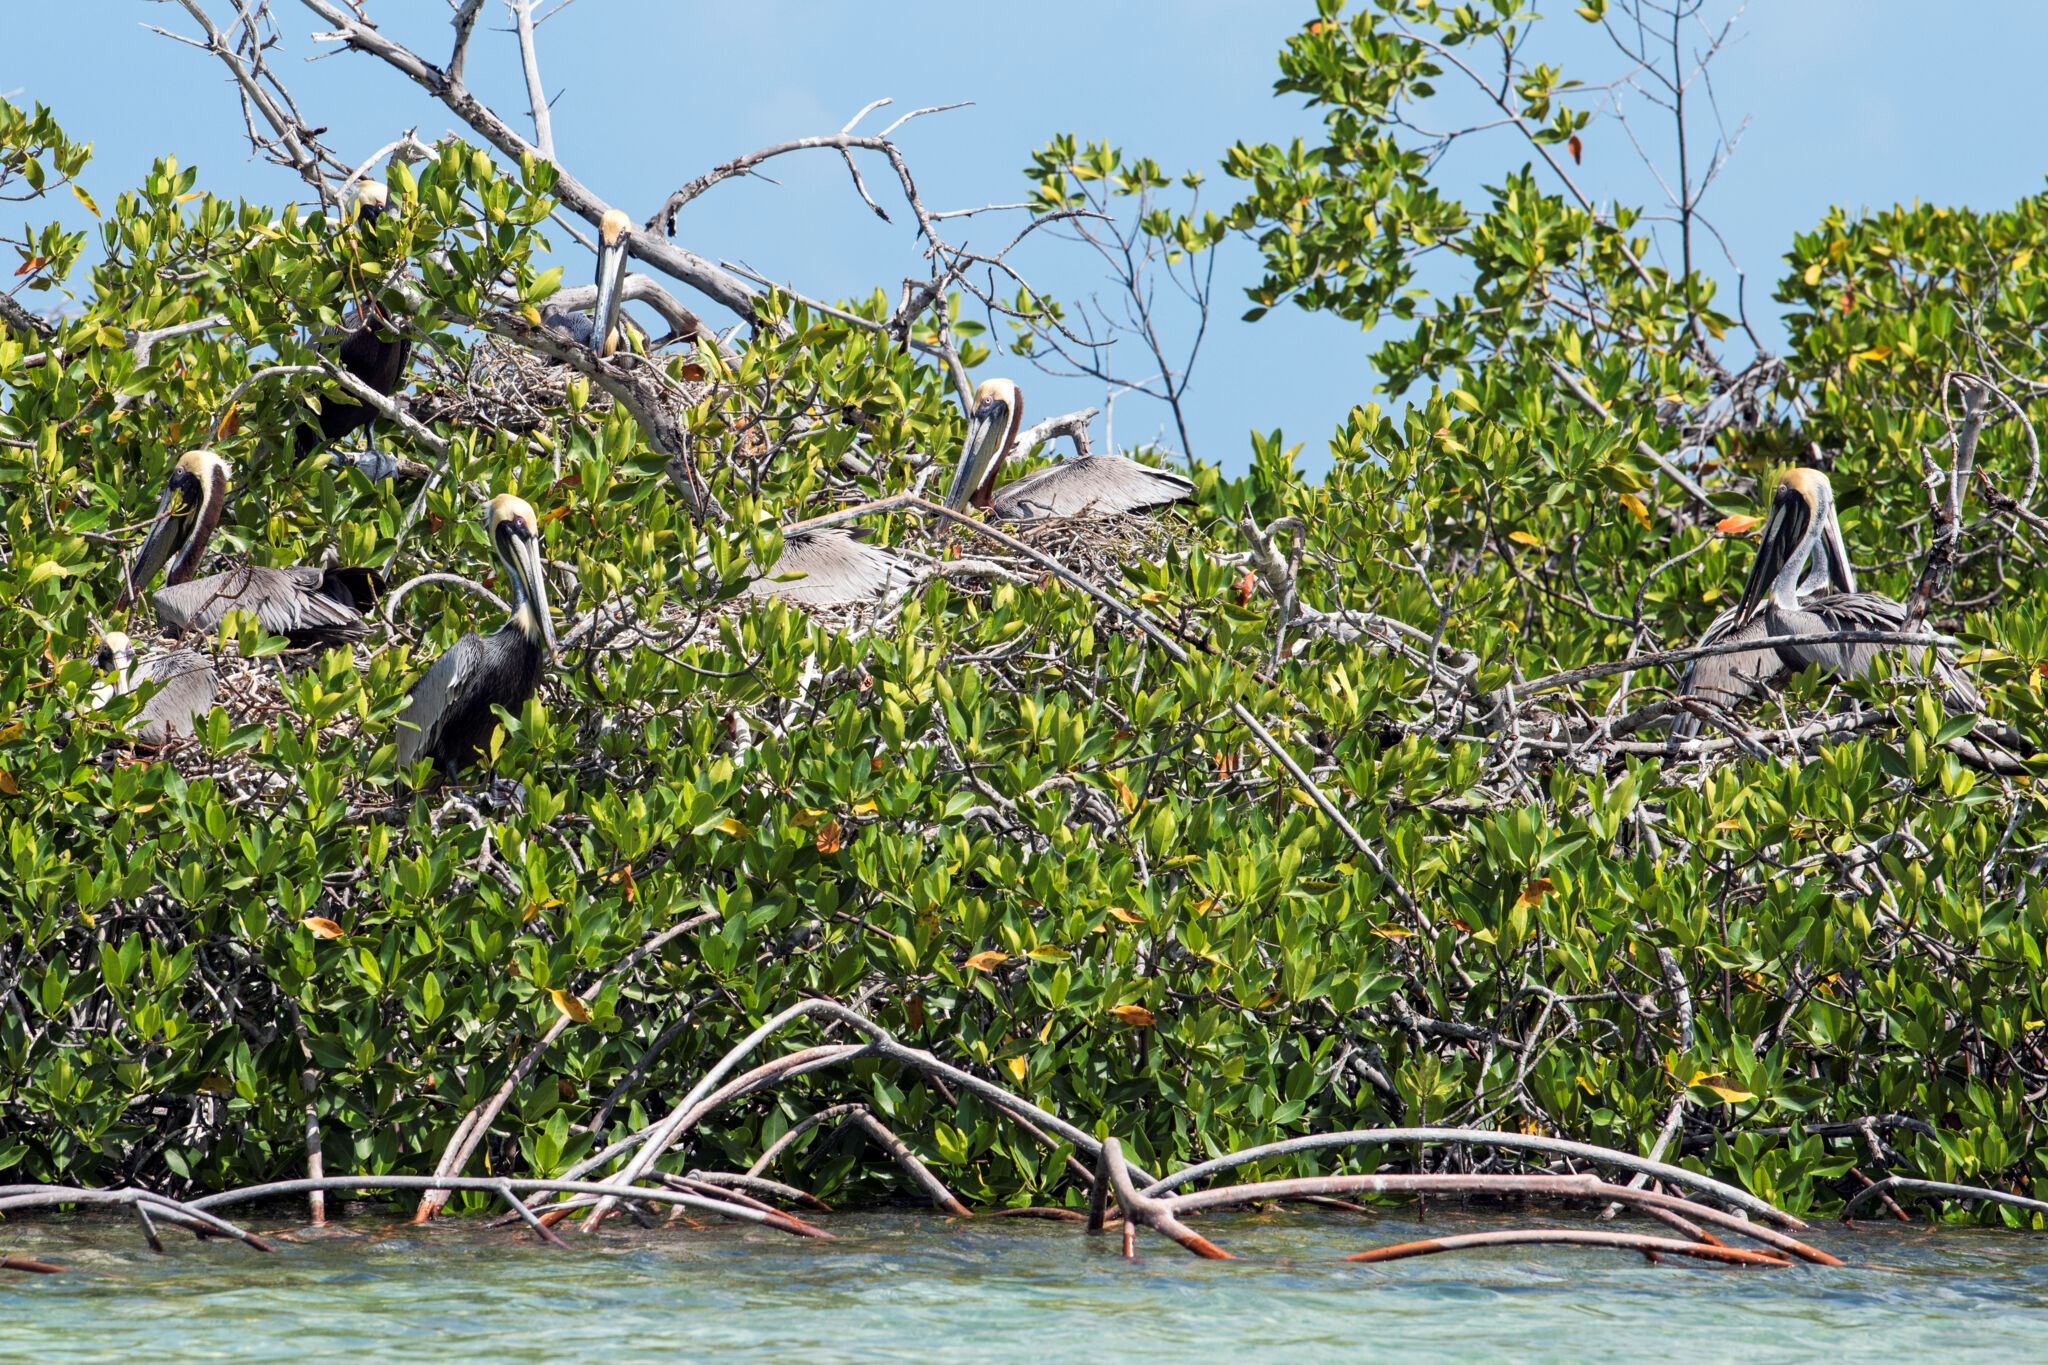 Mangroves | Visit Turks and Caicos Islands